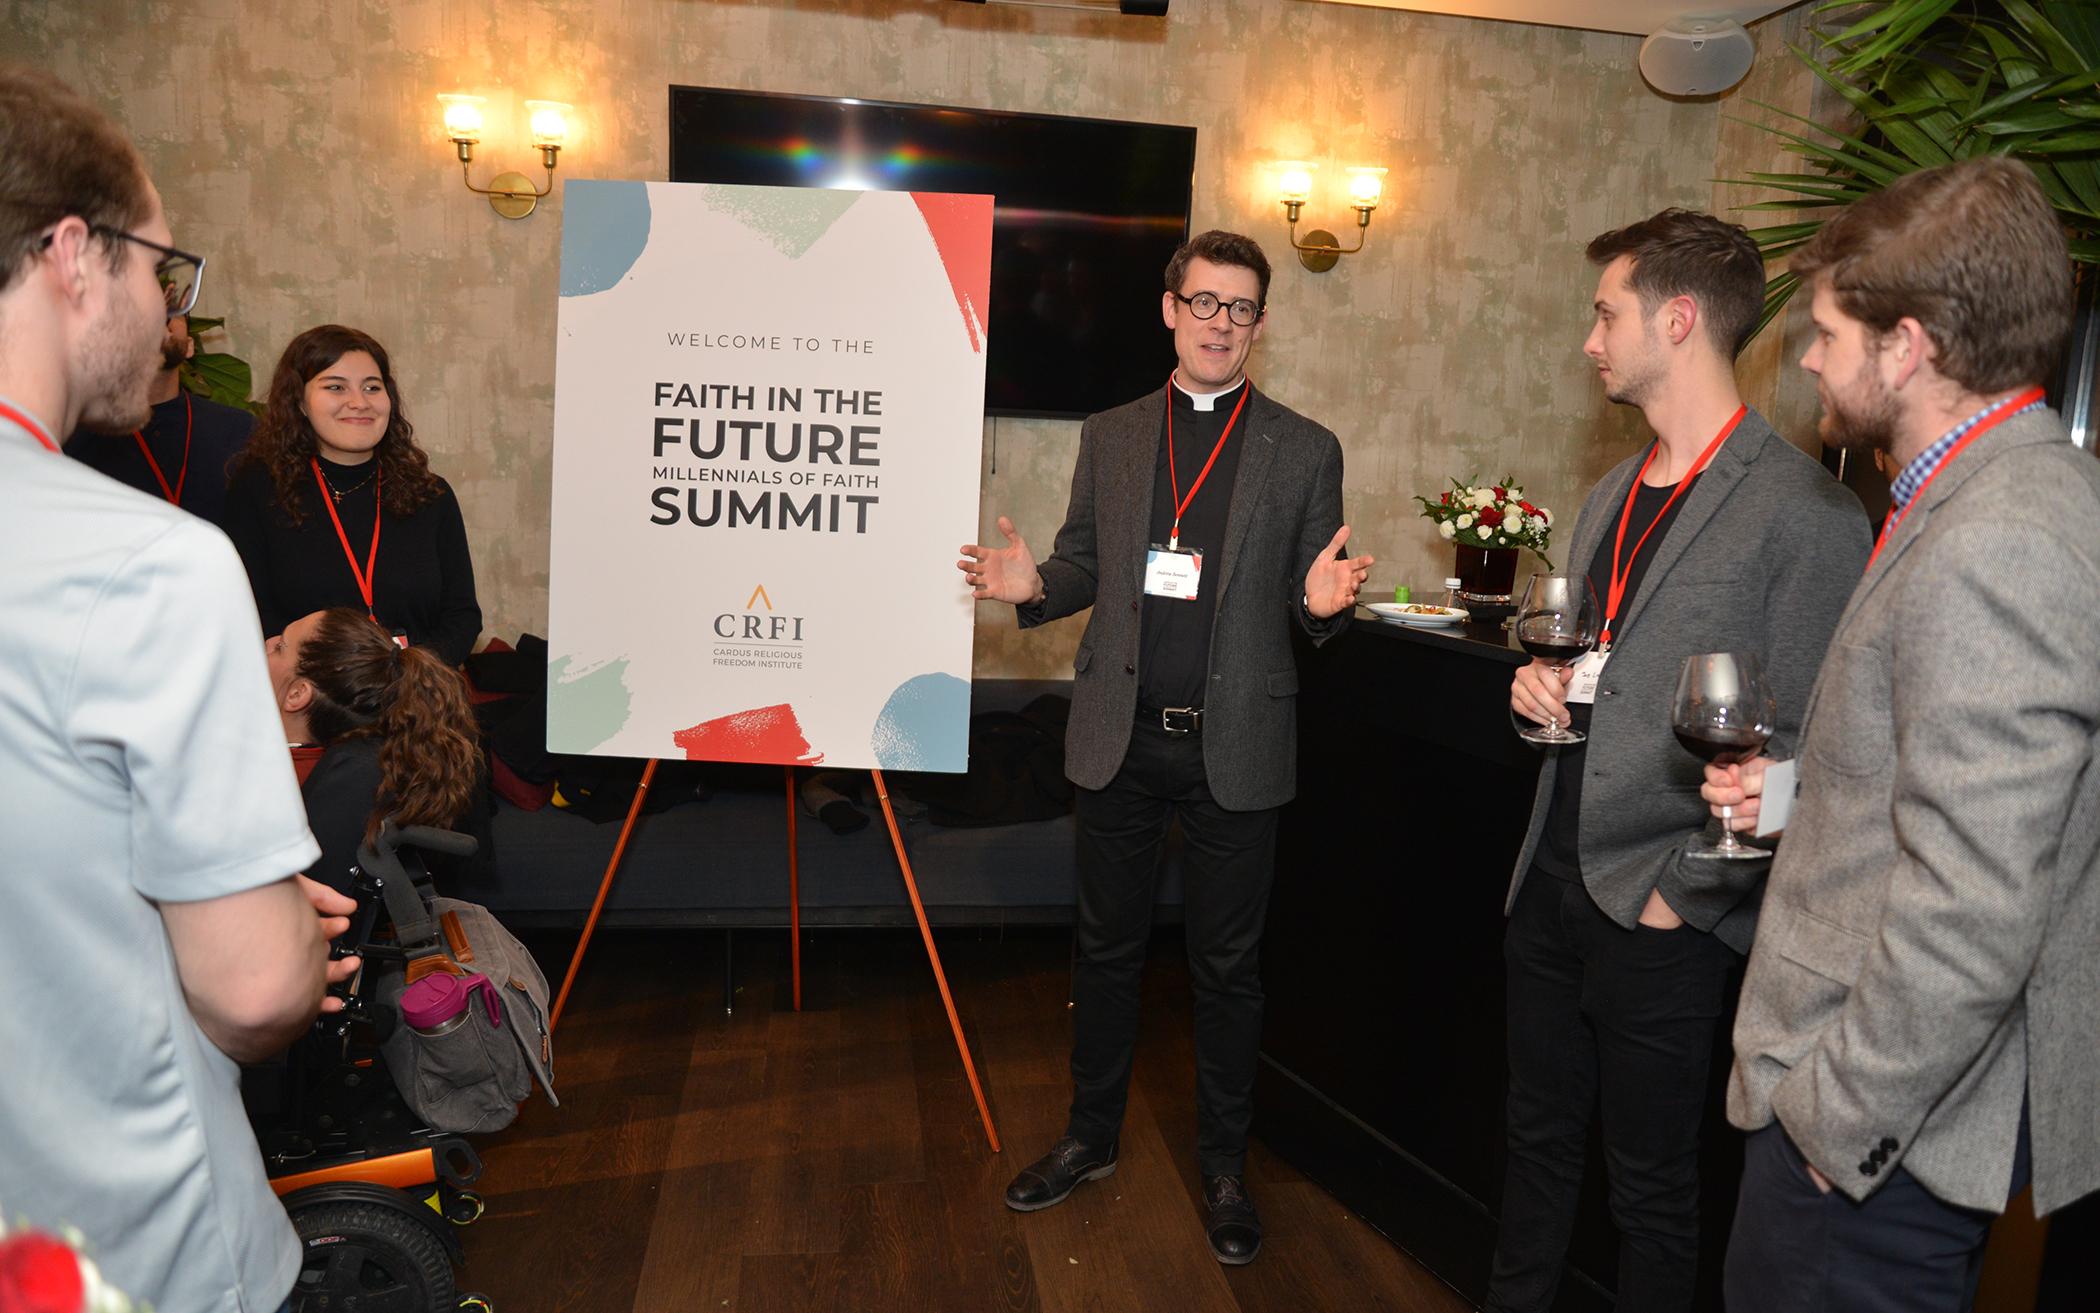 Andrew Bennett (center), director of the Cardus Religious Freedom Institute, welcomes participants to the first Faith in the Future summit in November 2019.